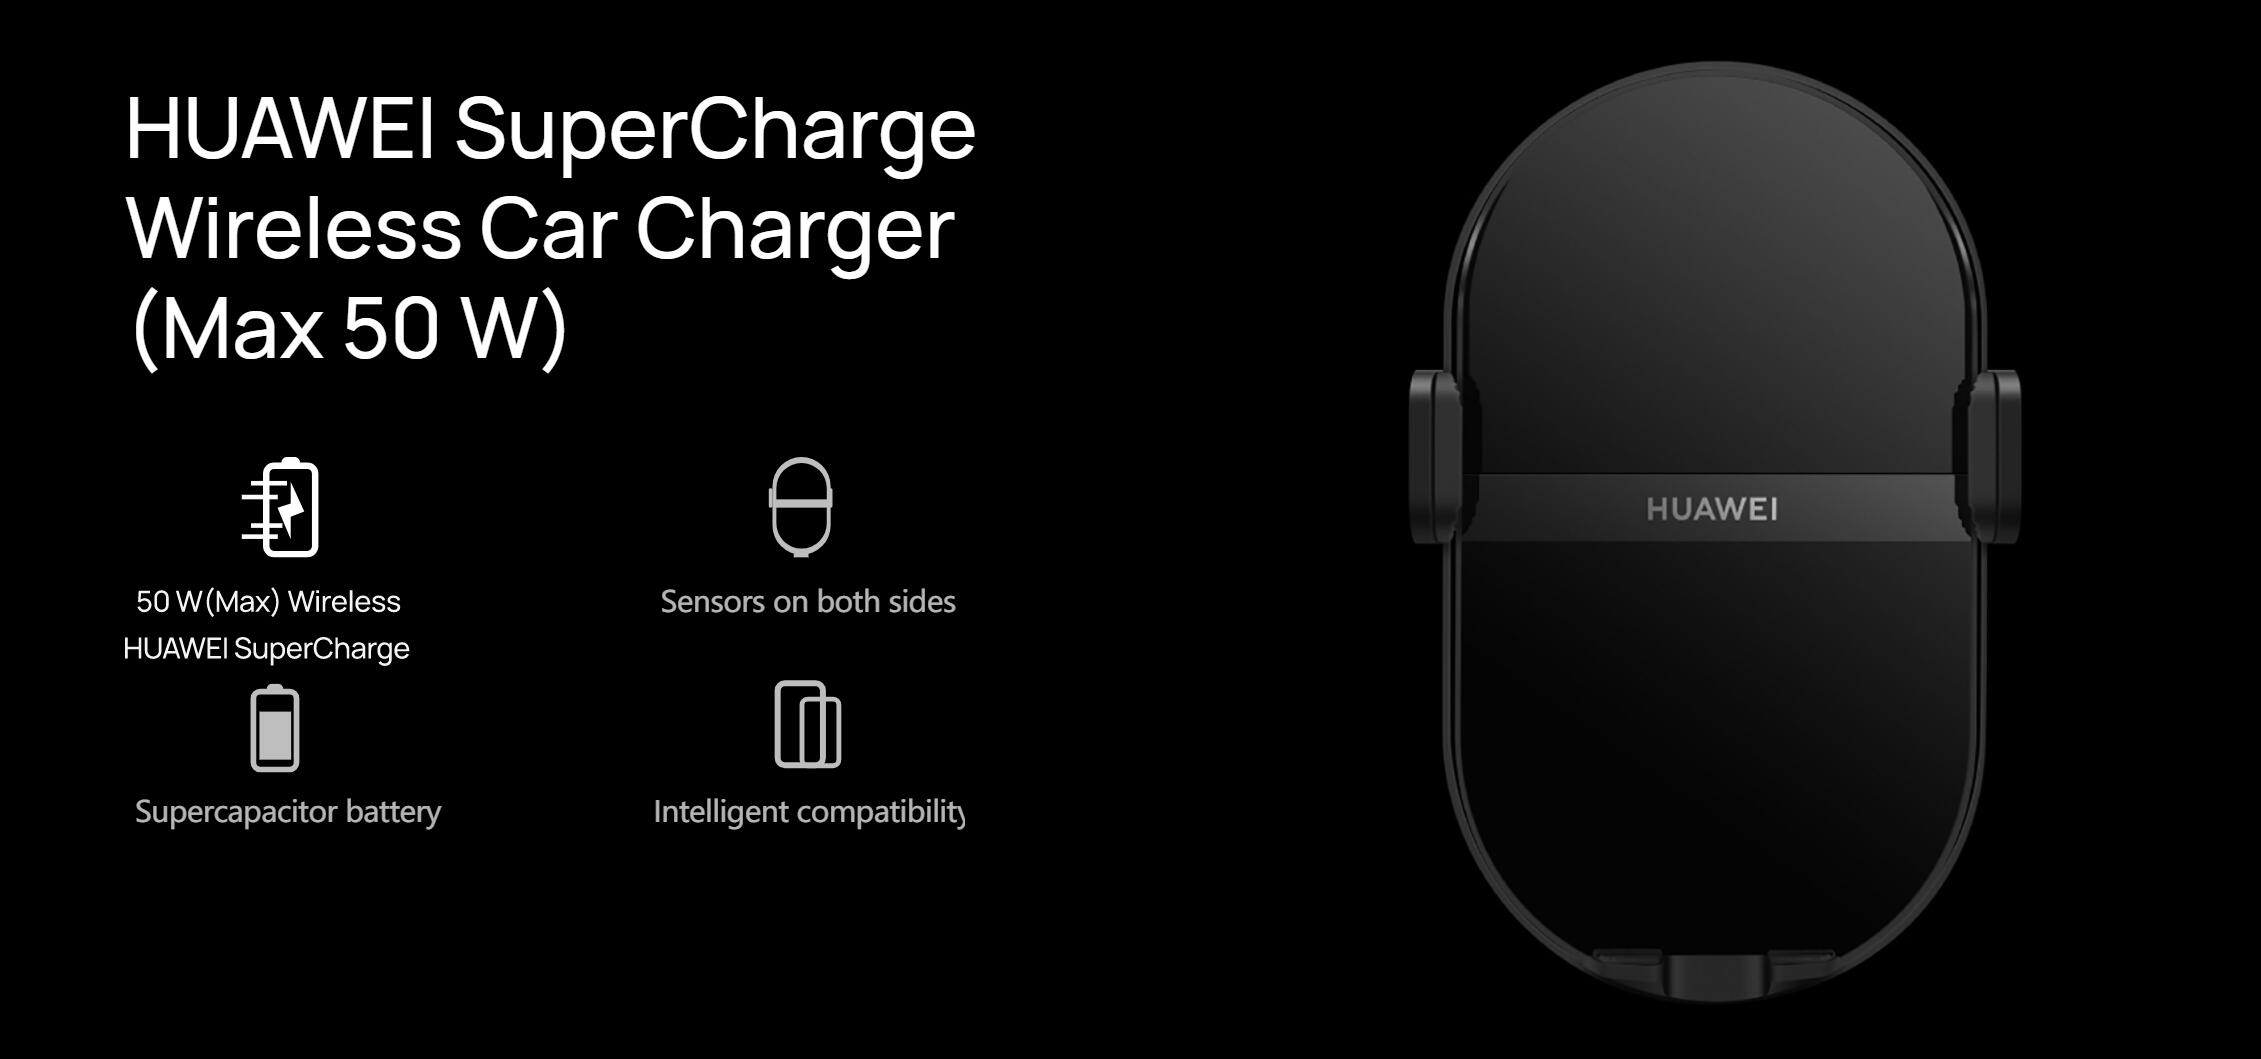 HUAWEI_50W_SuperCharge_Wireless_Car_Charger-01.jpg